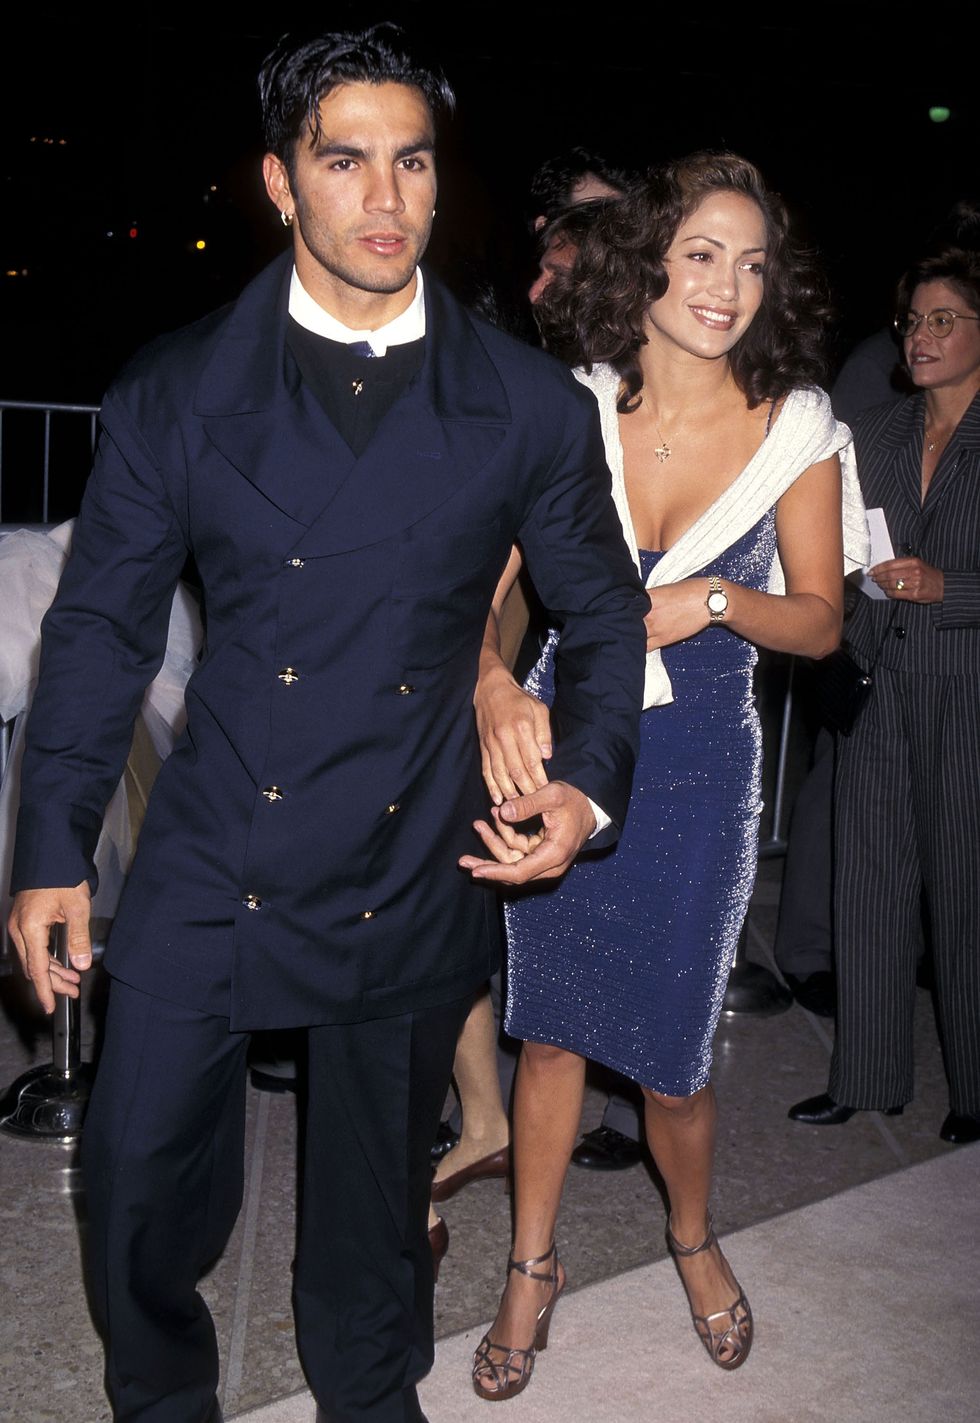 actress jennifer lopez and husband ojani noa attend that old feeling century city premiere on march 31, 1997 at cineplex odeon century plaza cinemas in century city, california